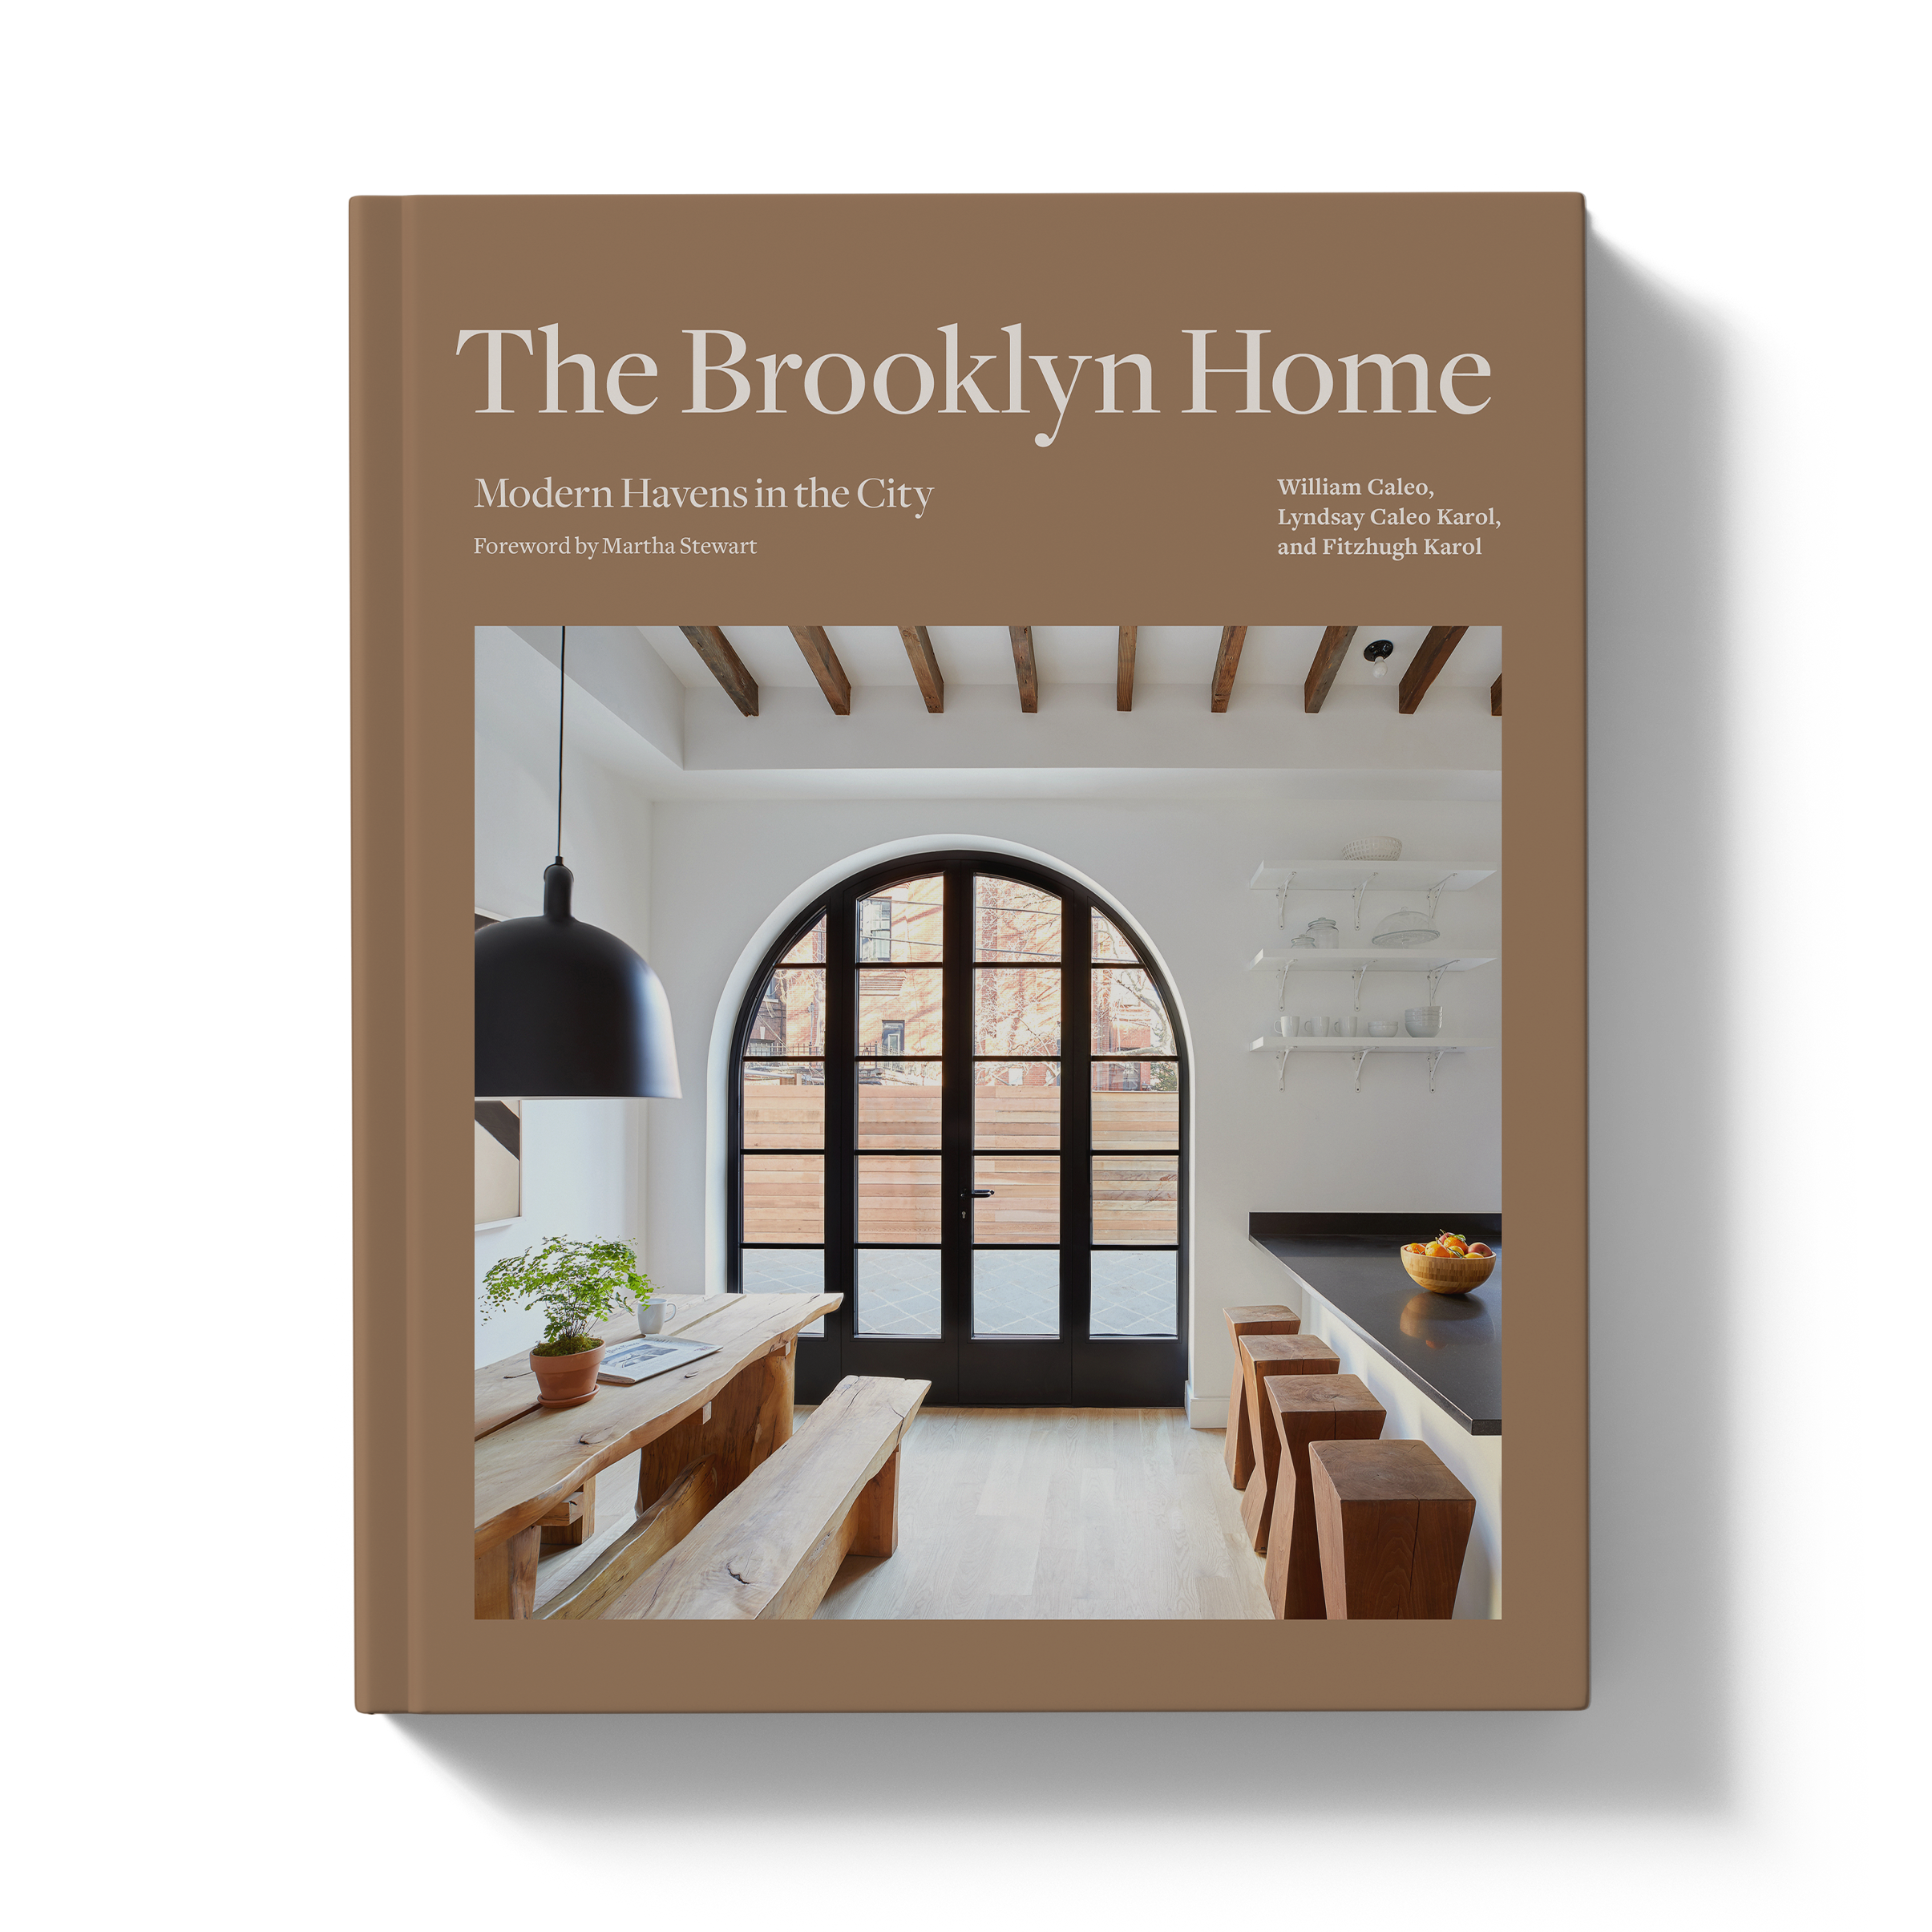 The Brooklyn Home book cover